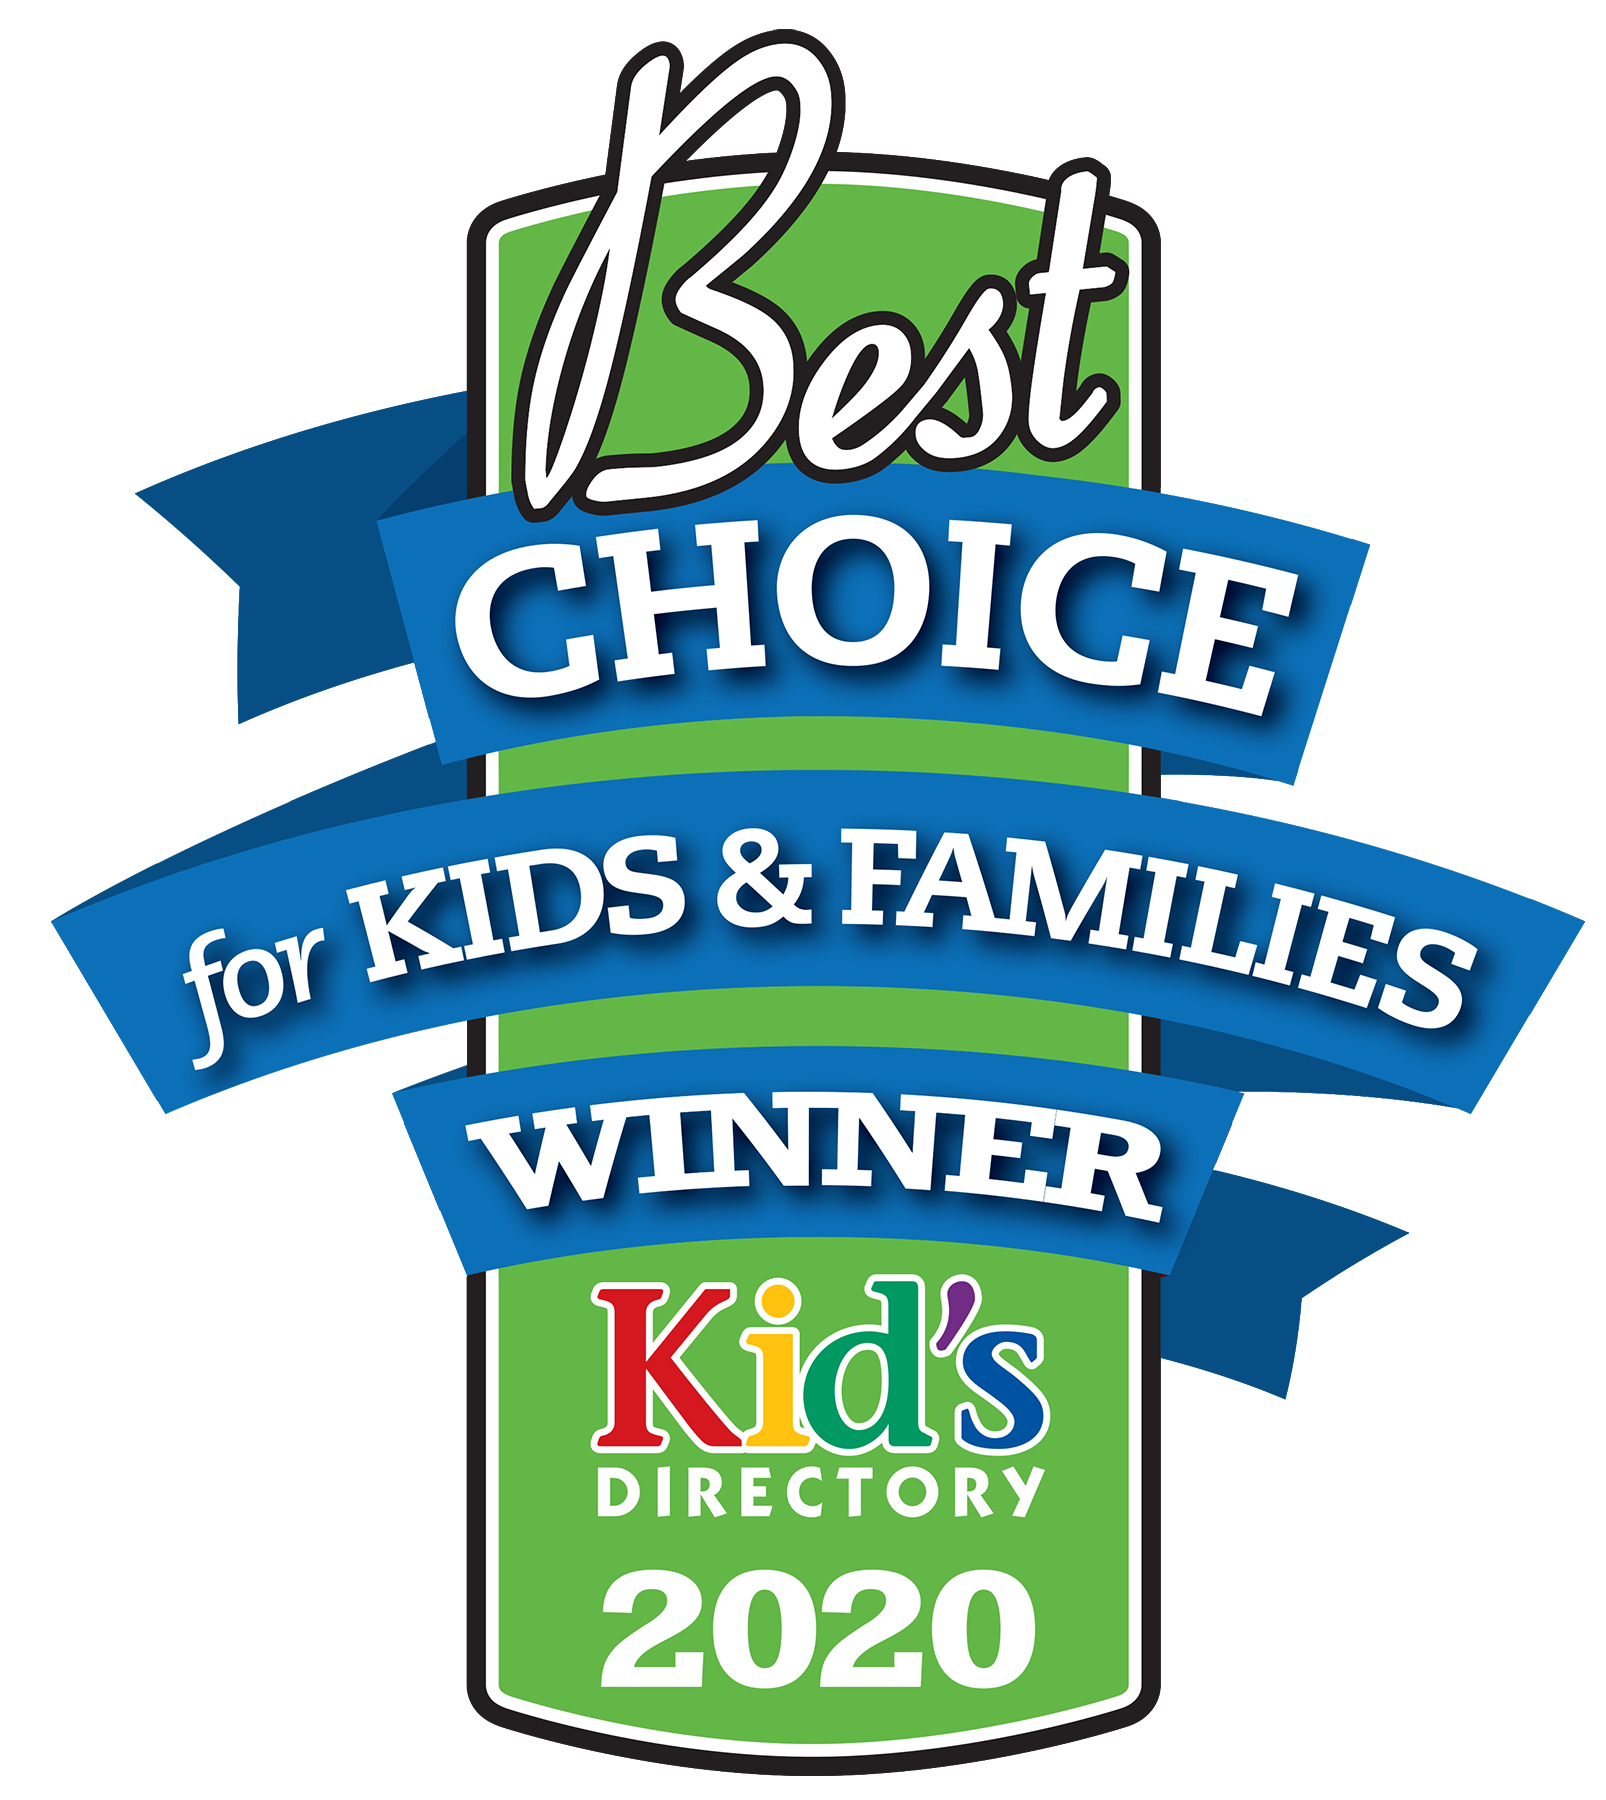 Best choice for Kids and Families Winner logo.